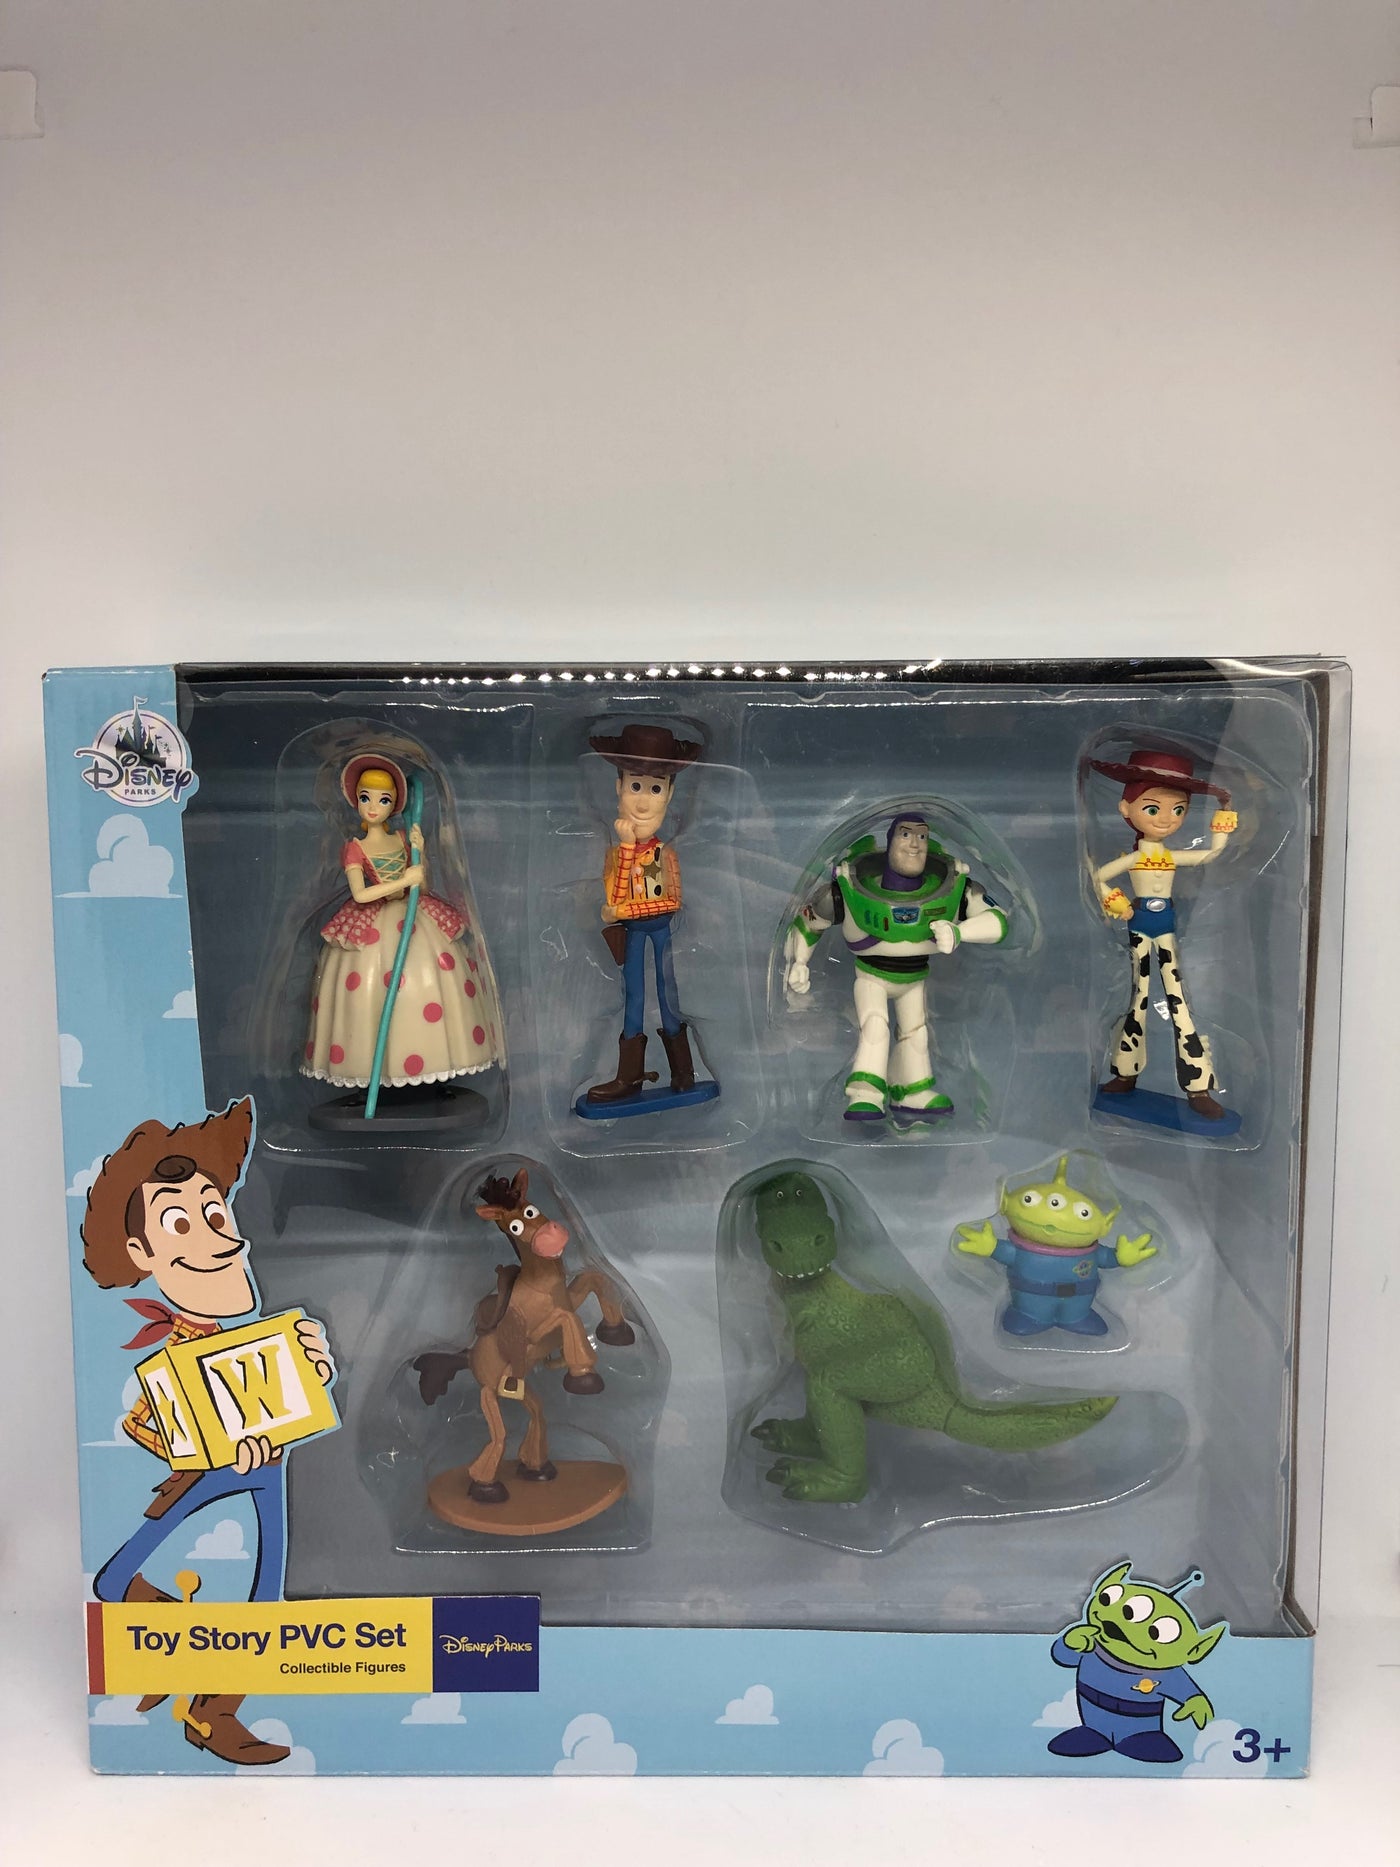 Disney Parks Toy Story 4 PVC Playset Cake Topper Figurine New with Box